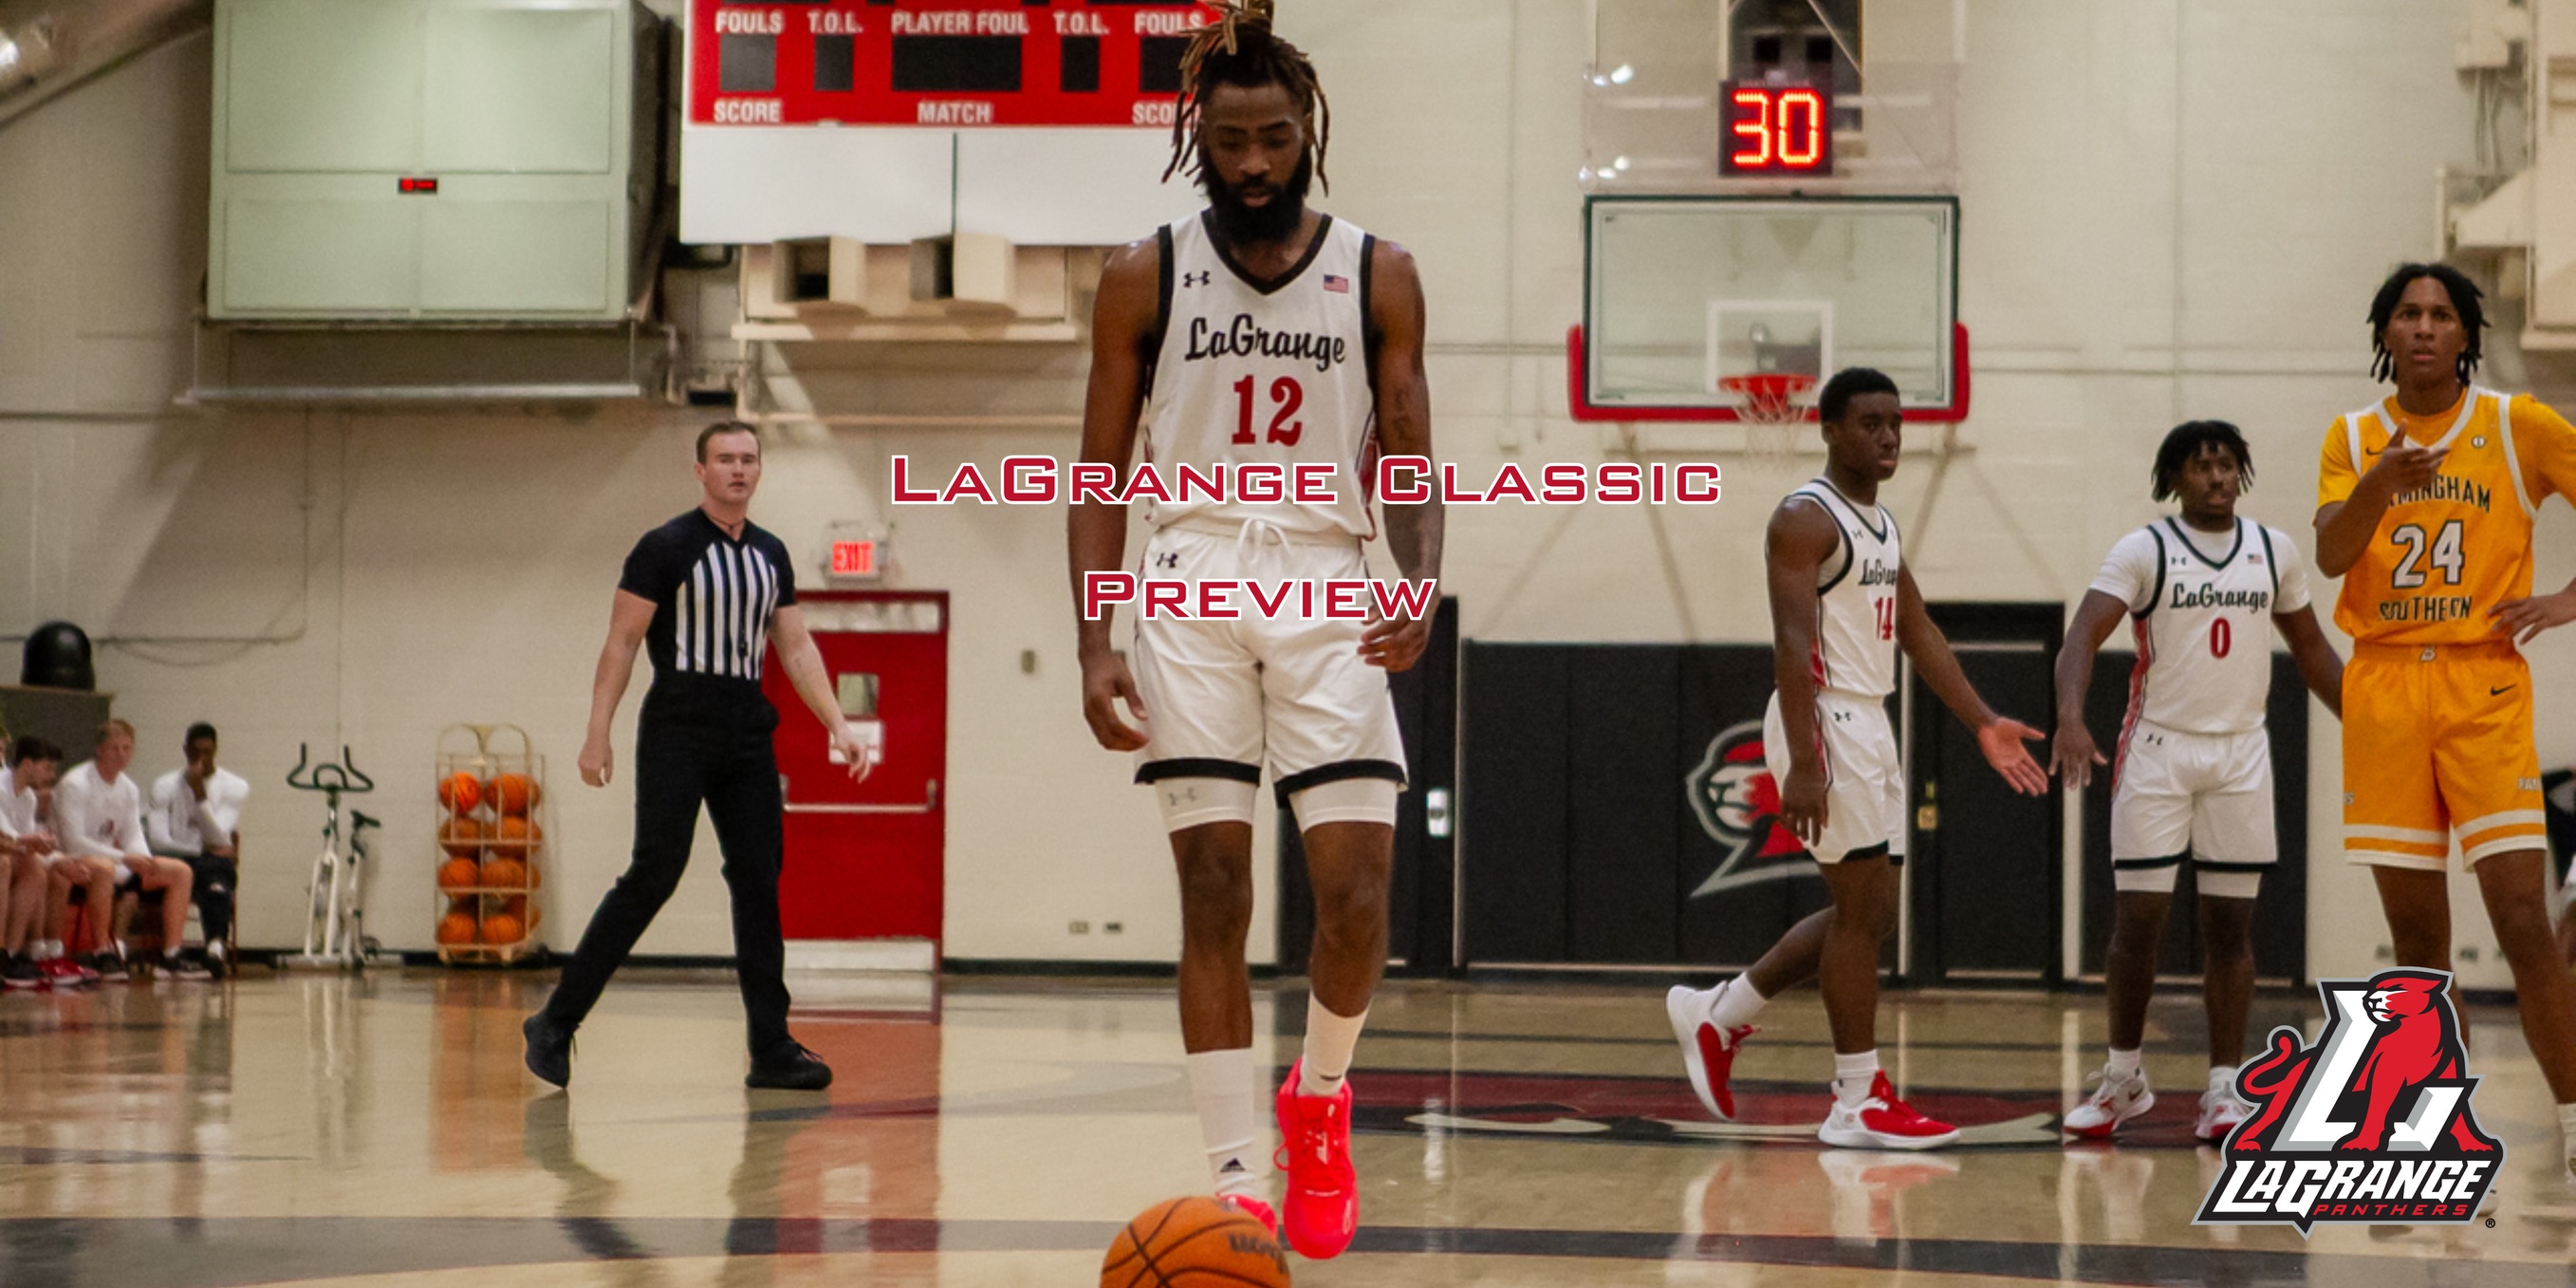 Men’s basketball is set to host the LaGrange Classic this weekend (Nov. 18 and 19)